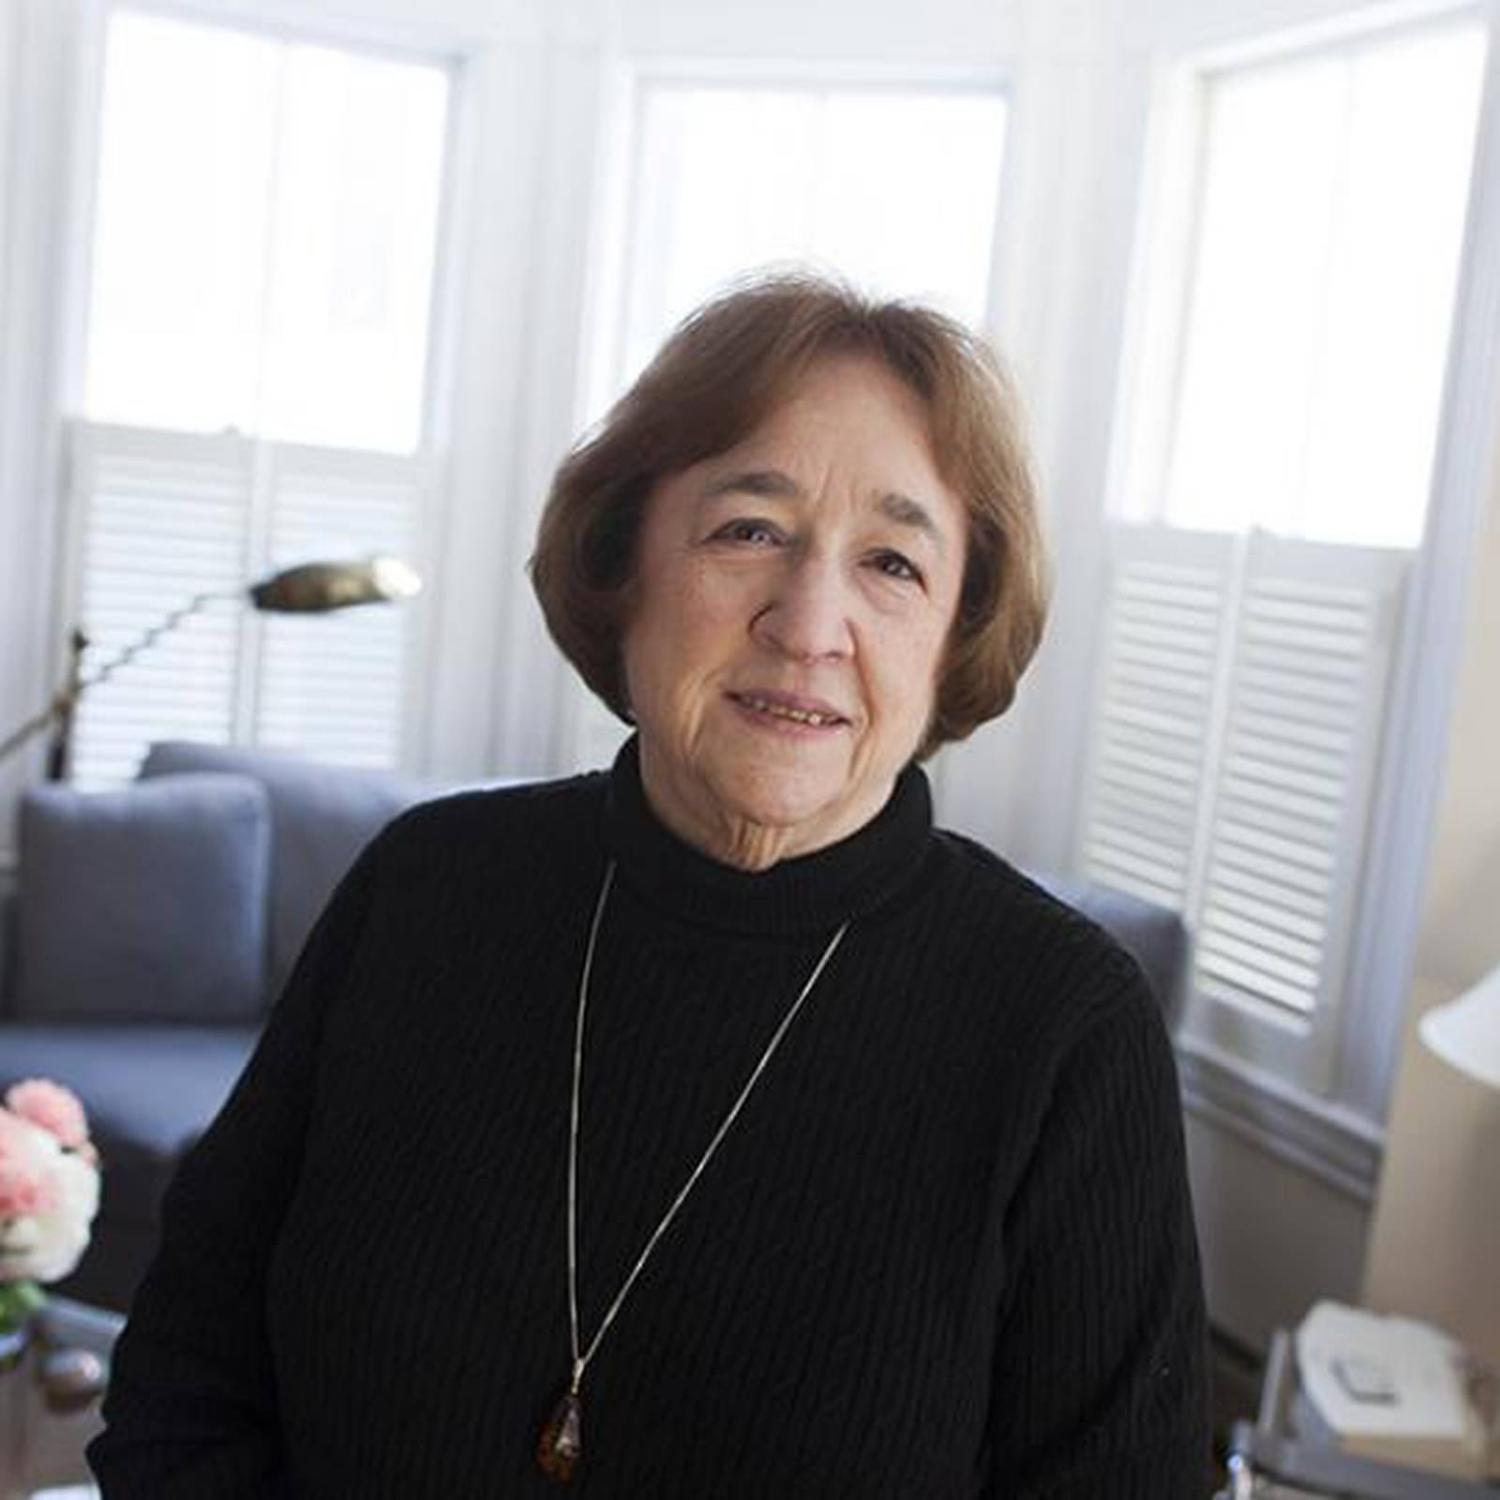 Helen Vendler looks into the camera while wearing a black shirt.